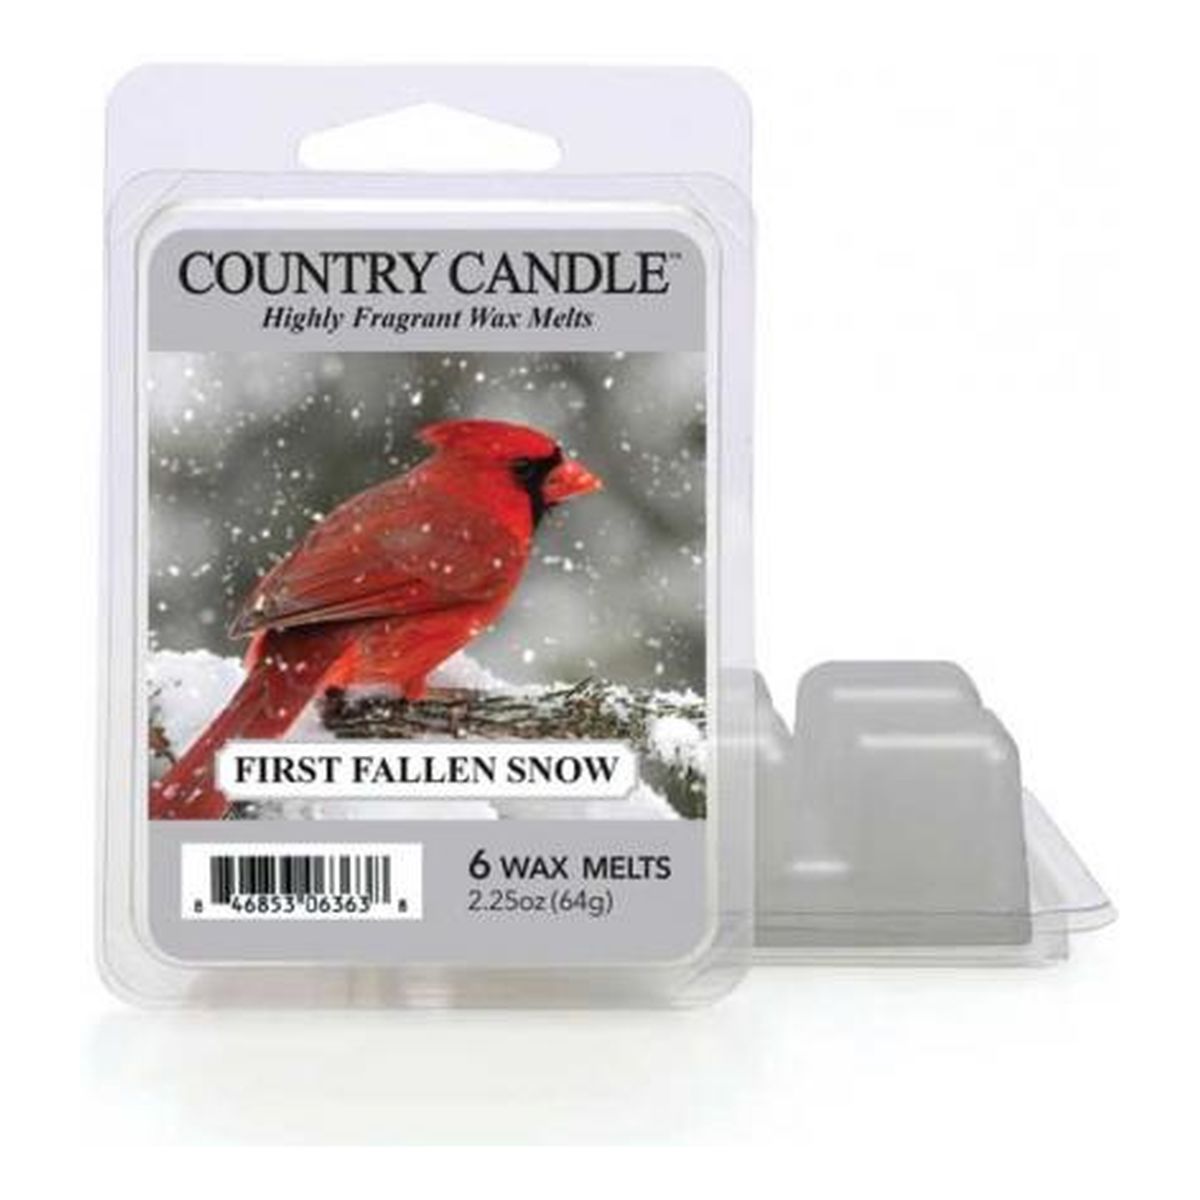 Country Candle Wax wosk zapachowy "potpourri" first fallen snow 64g